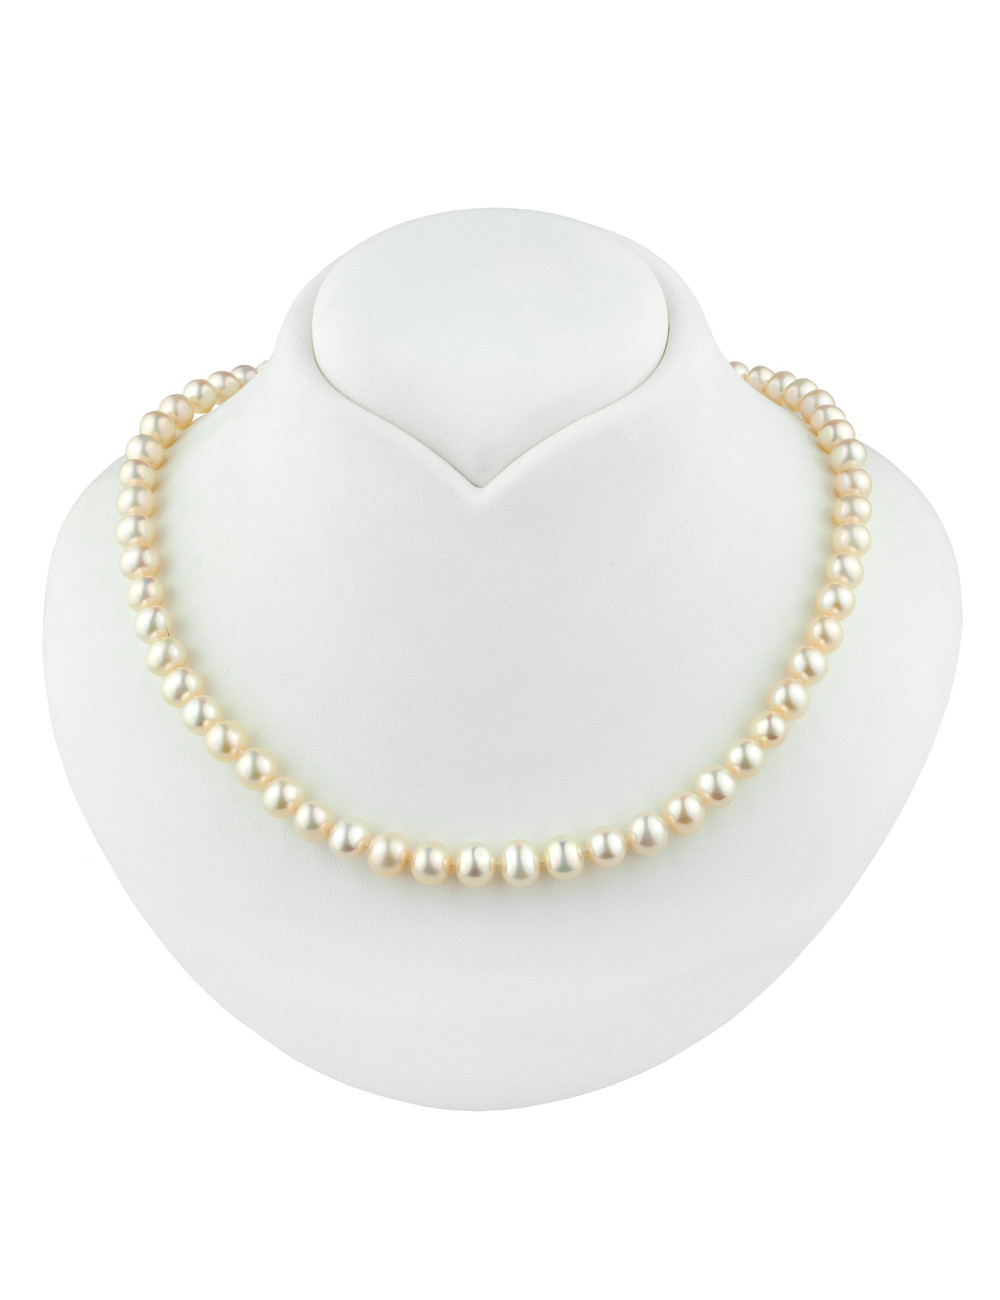 Light pink oval medium pearl necklace with carabiner clasp Ns06575S